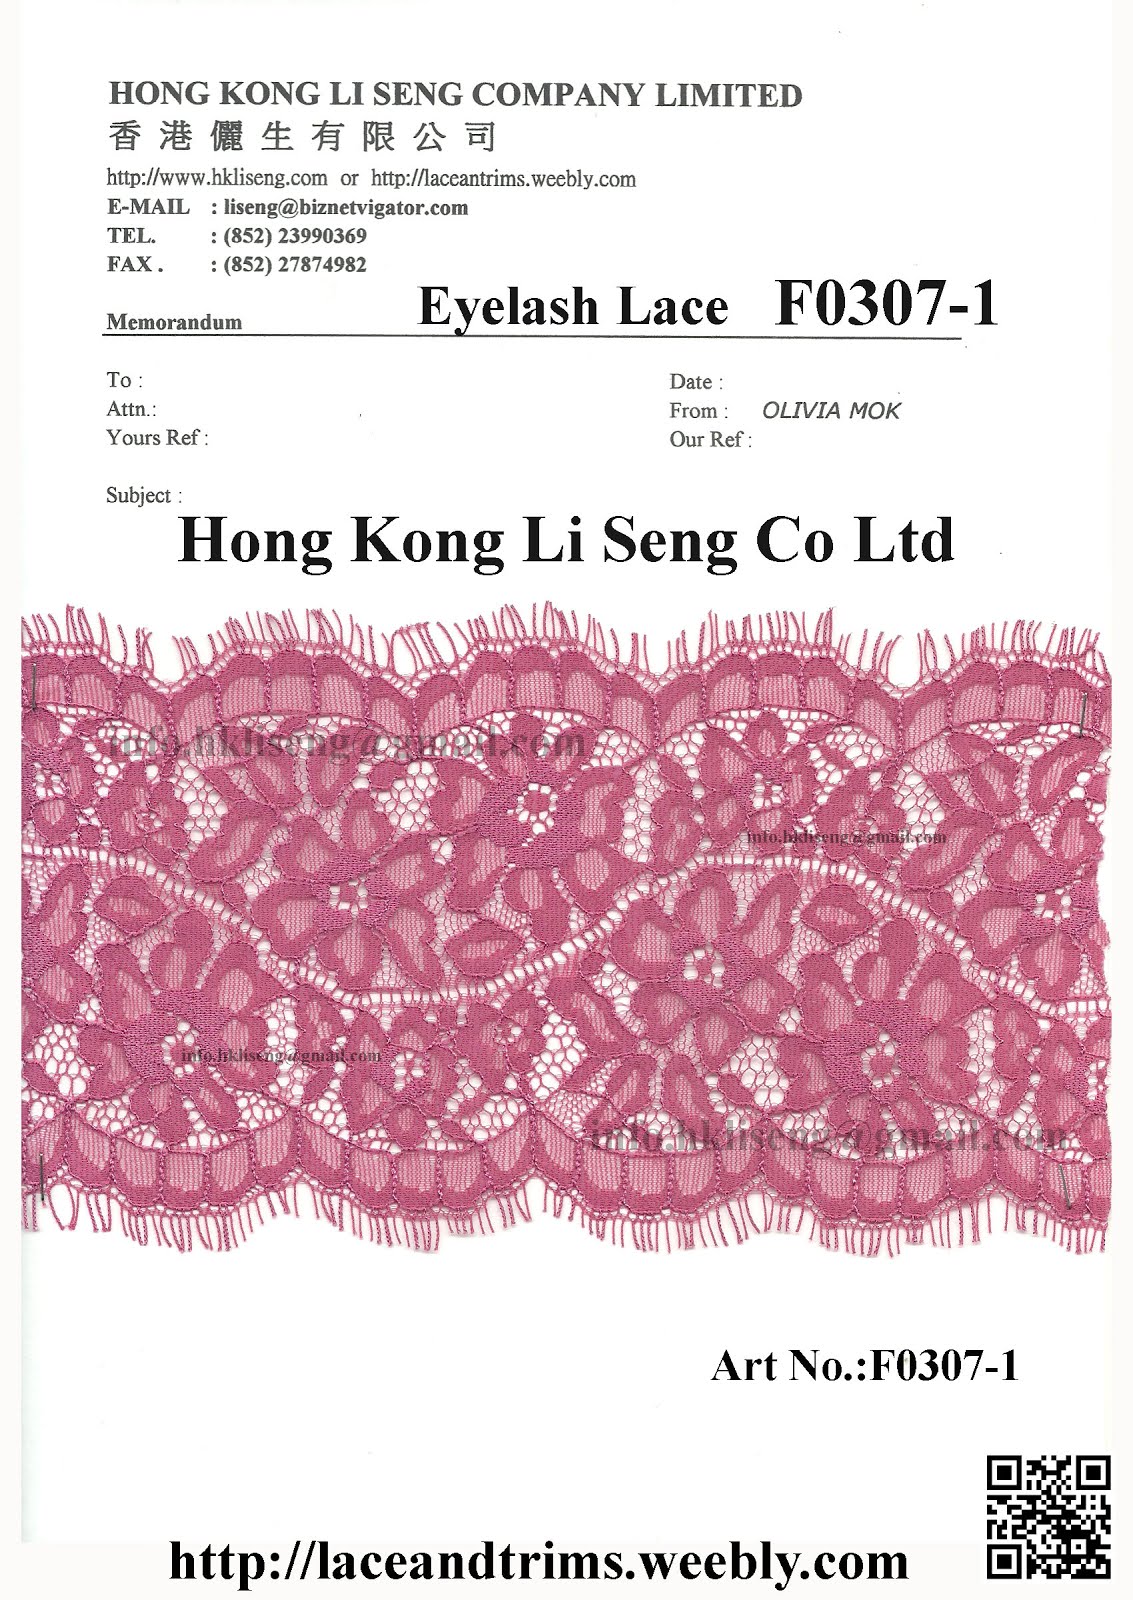 New Eyelash Lace Trims Pattern for all Kind Textile and Apparel Industry